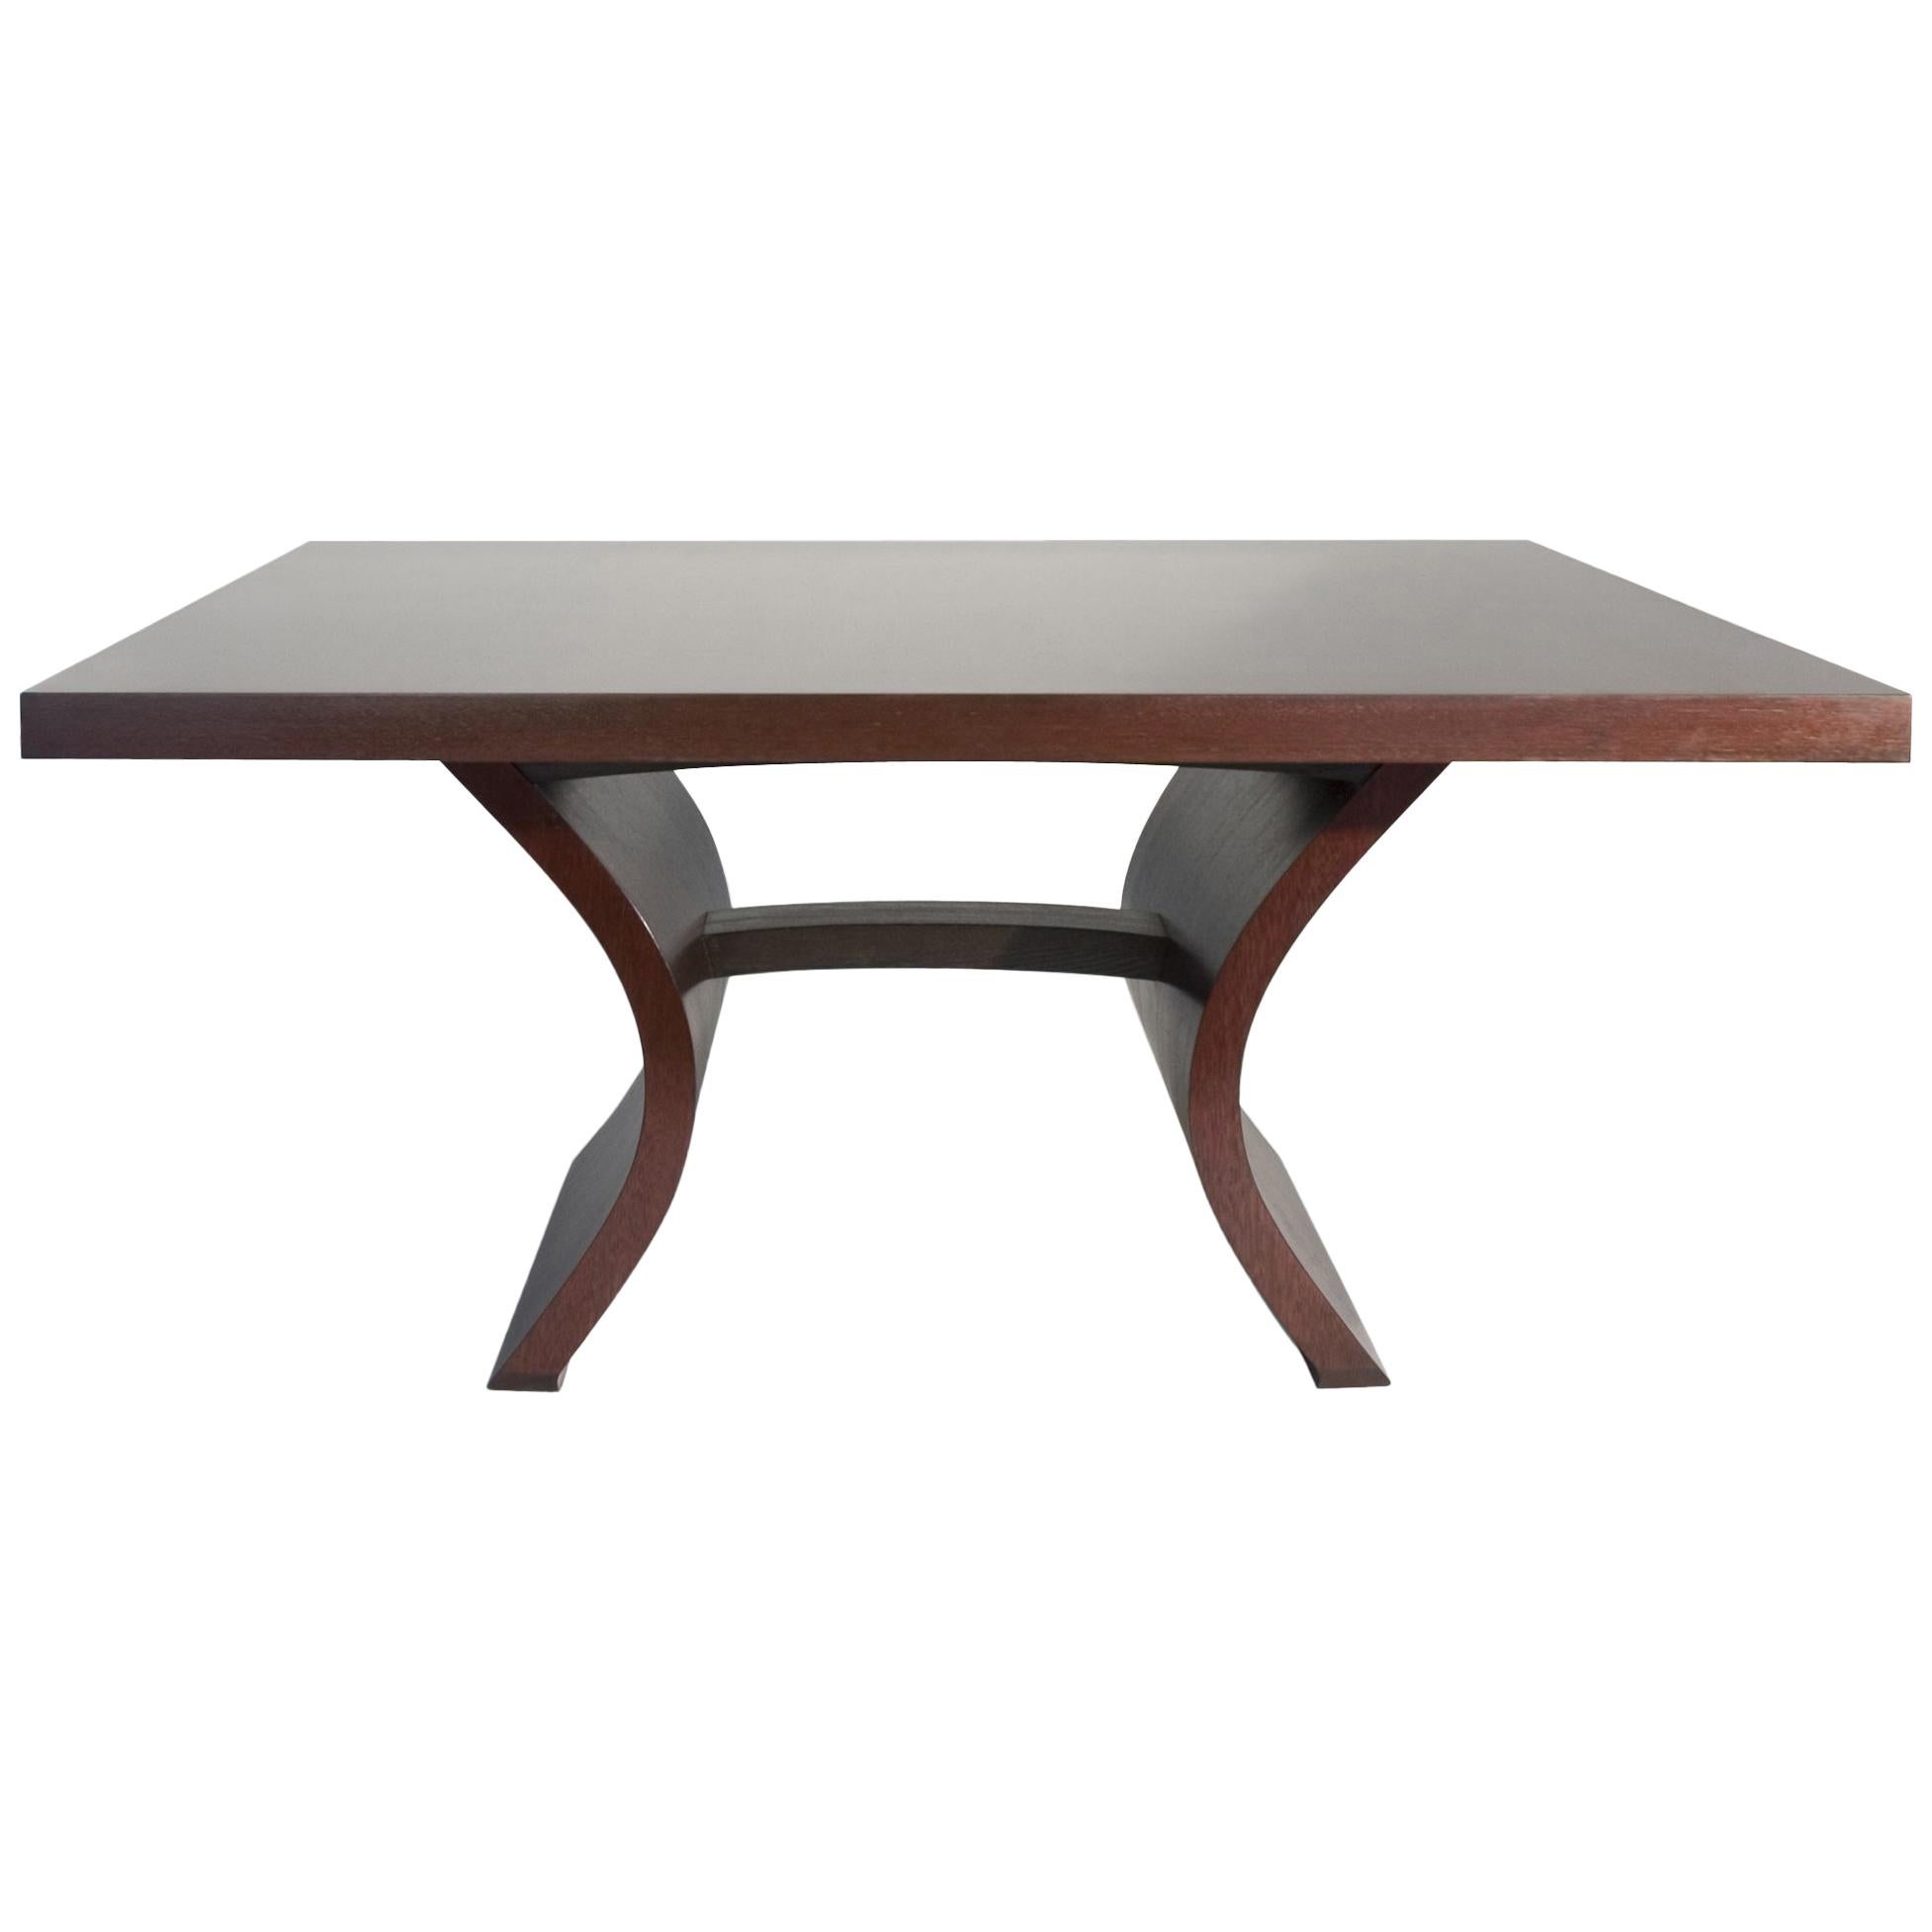 Bent Wood Base Dining Table in Black Walnut 